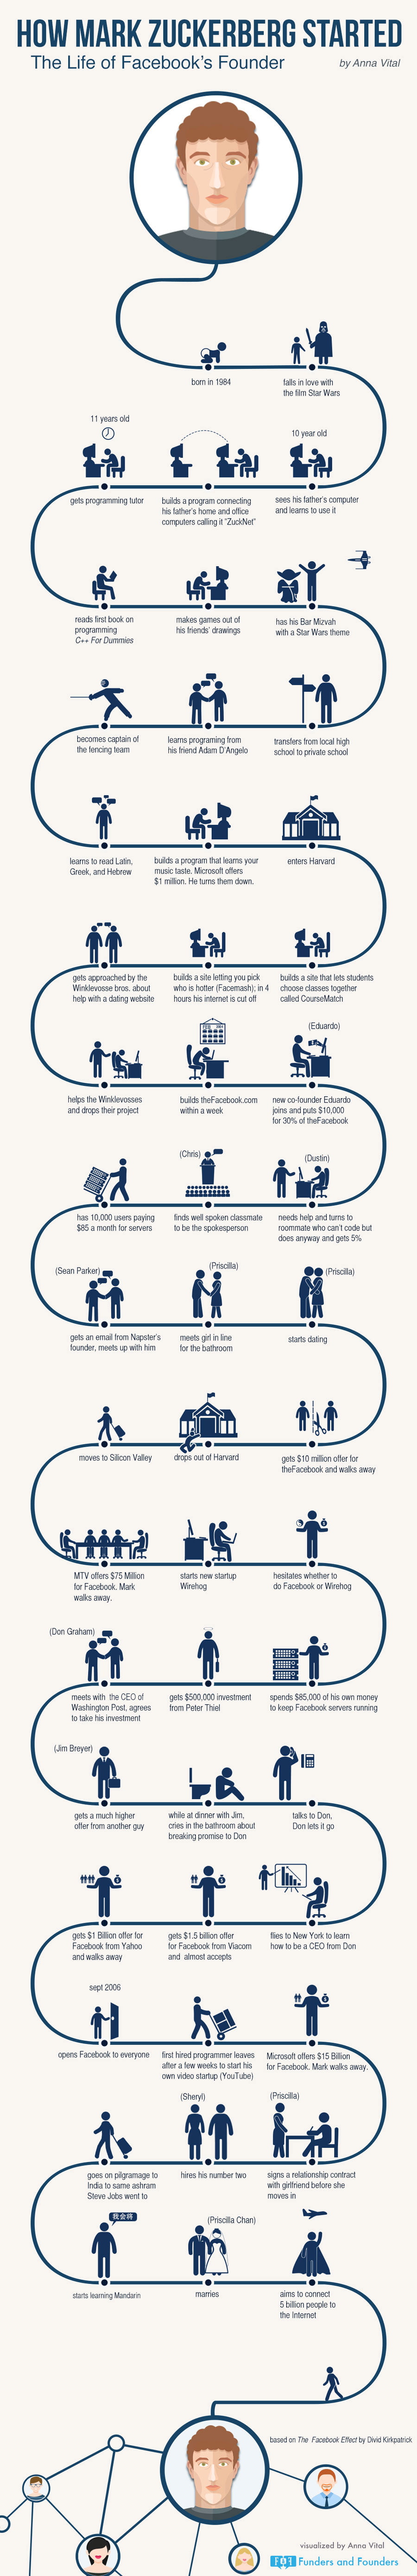 How-Mark-Zuckerberg-Started.-Motivational-And-Inspirational-infographic